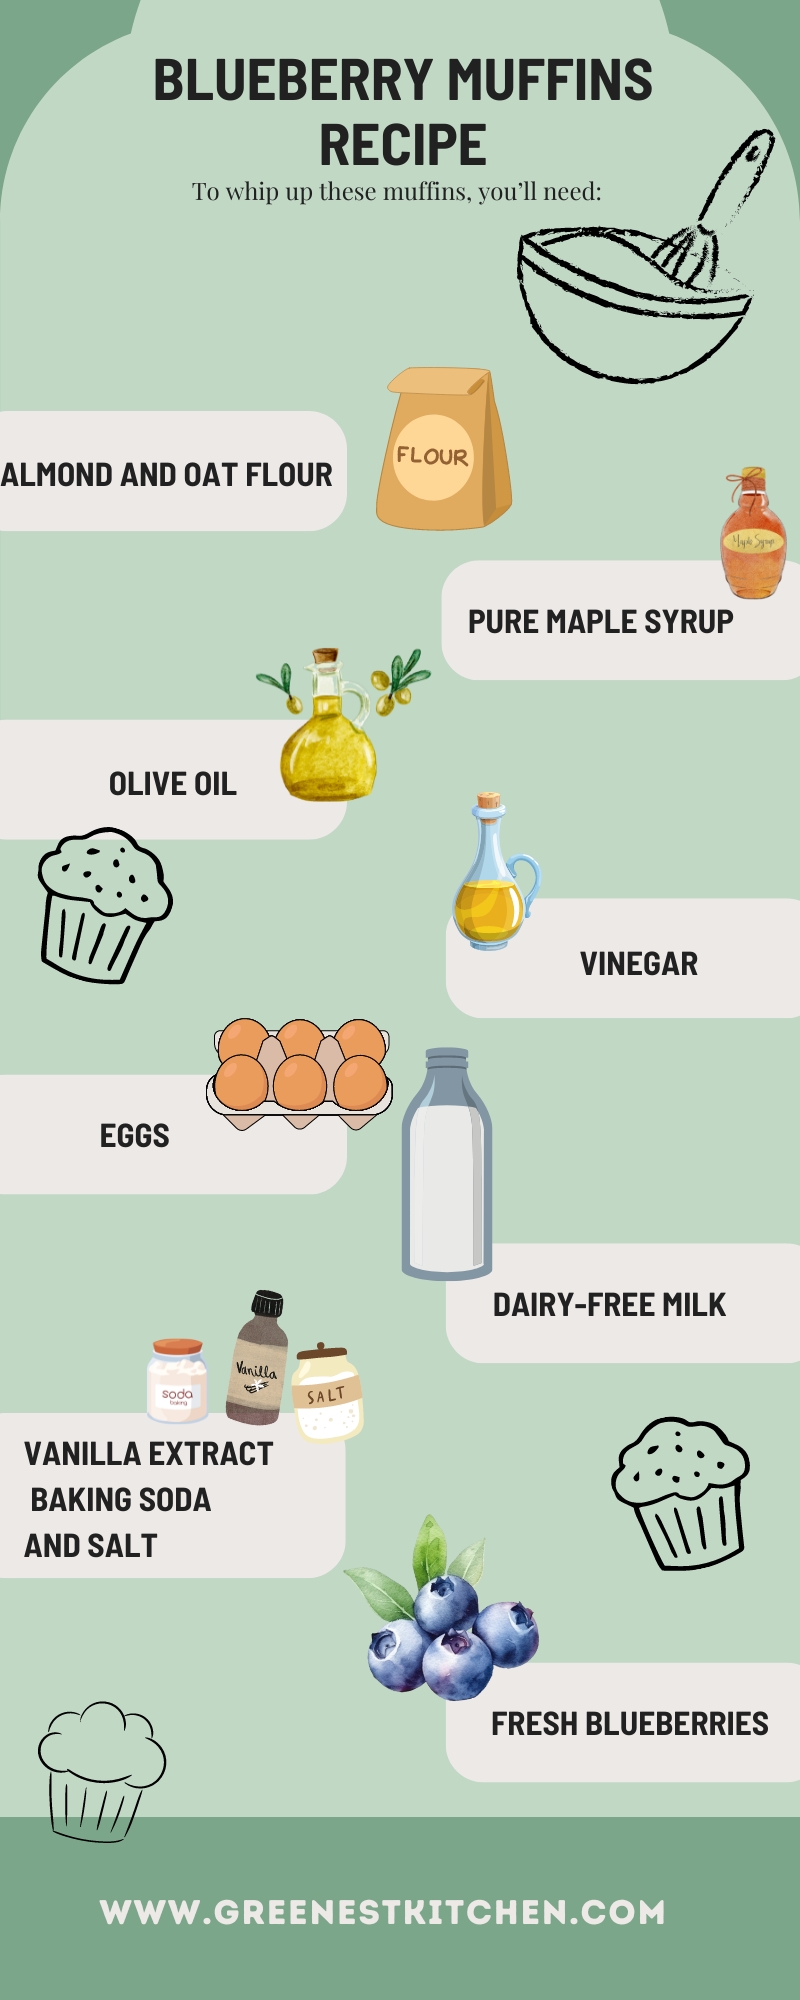 Blueberry Muffins Recipe infographic infographic